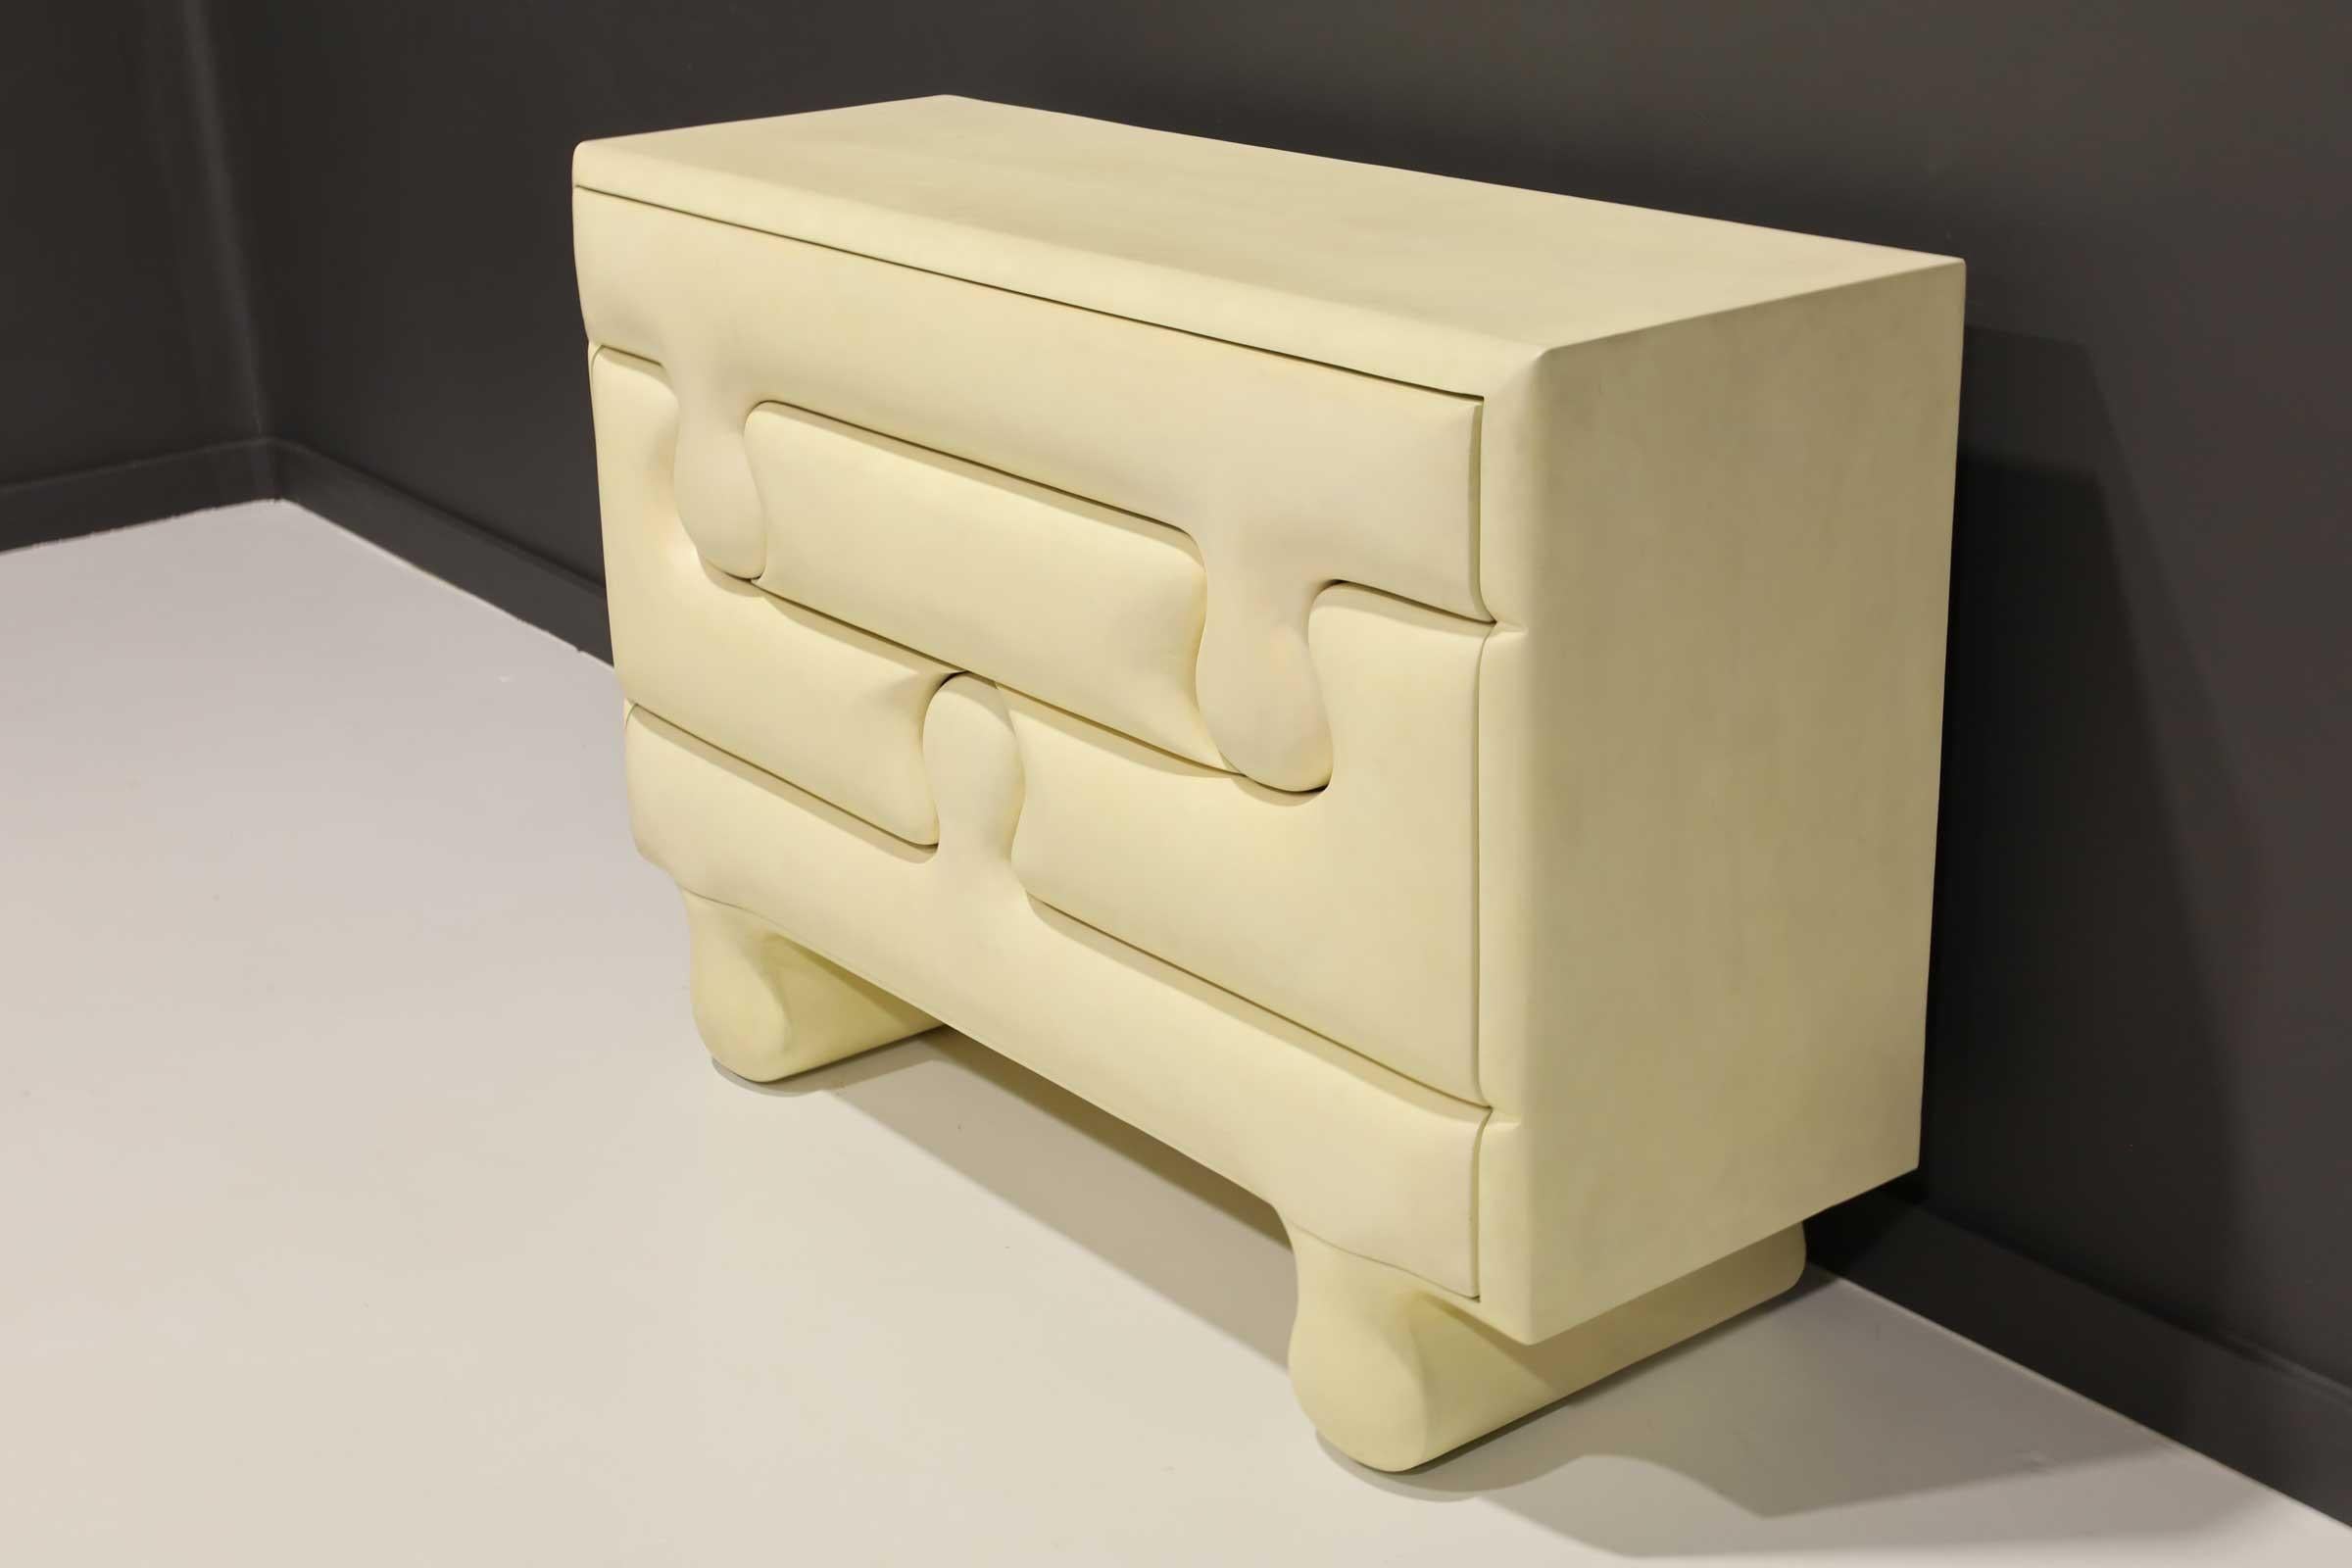 Scala Luxury goatskin puzzle chest. This puzzle chest is manteled with goatskin and has a low sheen hand polished lacquer finish. Inside the cabinet is finished with a high-gloss polished white lacquer. The drawers open/close on push (touch latch